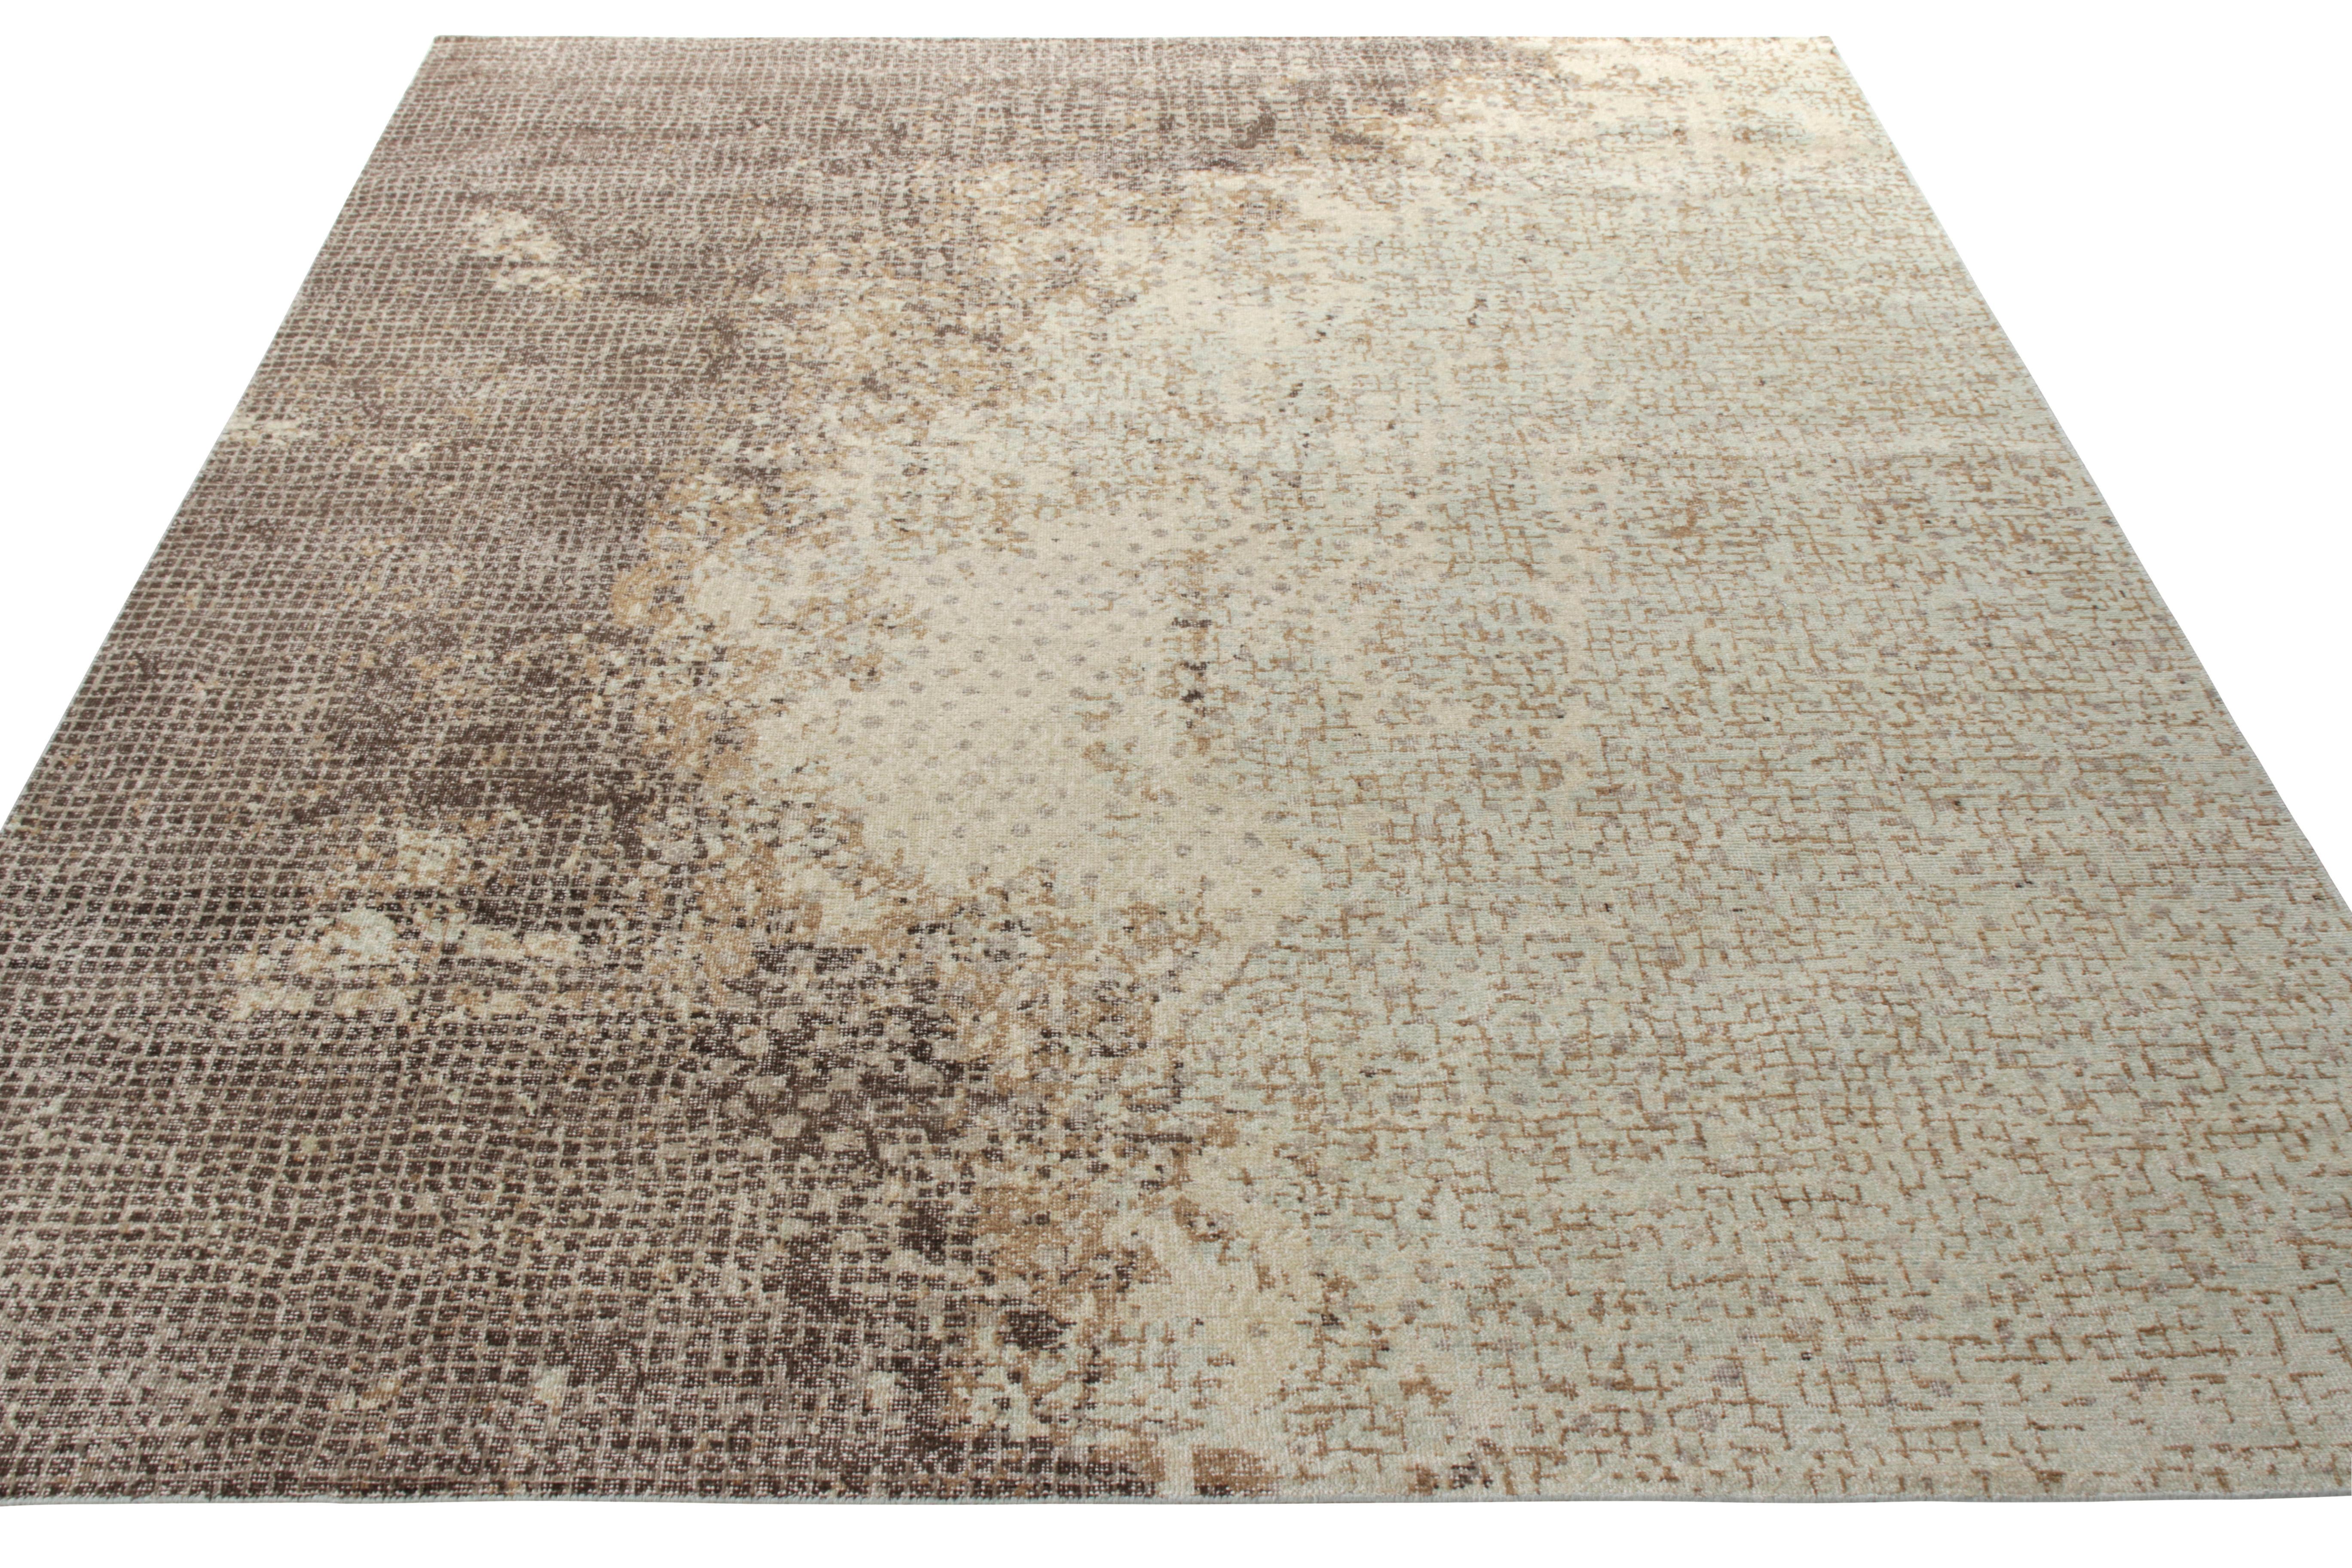 Rug & Kilim presents a delicious 9x12 take on distressed style from its Homage collection. Bearing the signature traits of our exclusive Dots Line, the rug witnesses a scintillating abstract pattern that manifests with beige-brown dots scattered on